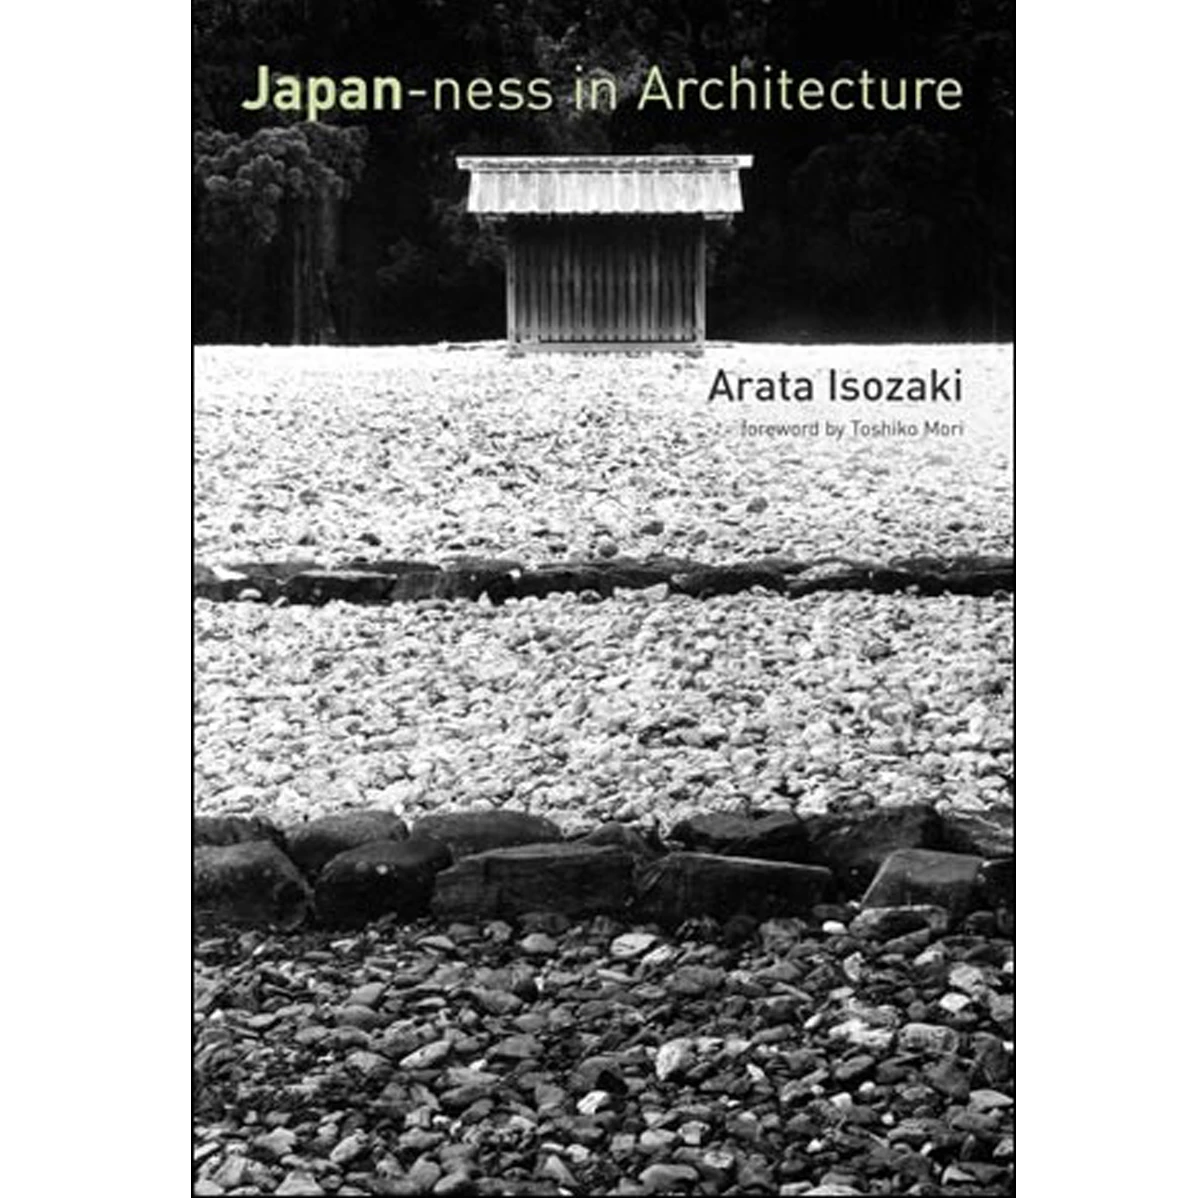 Japan-ness in Architecture